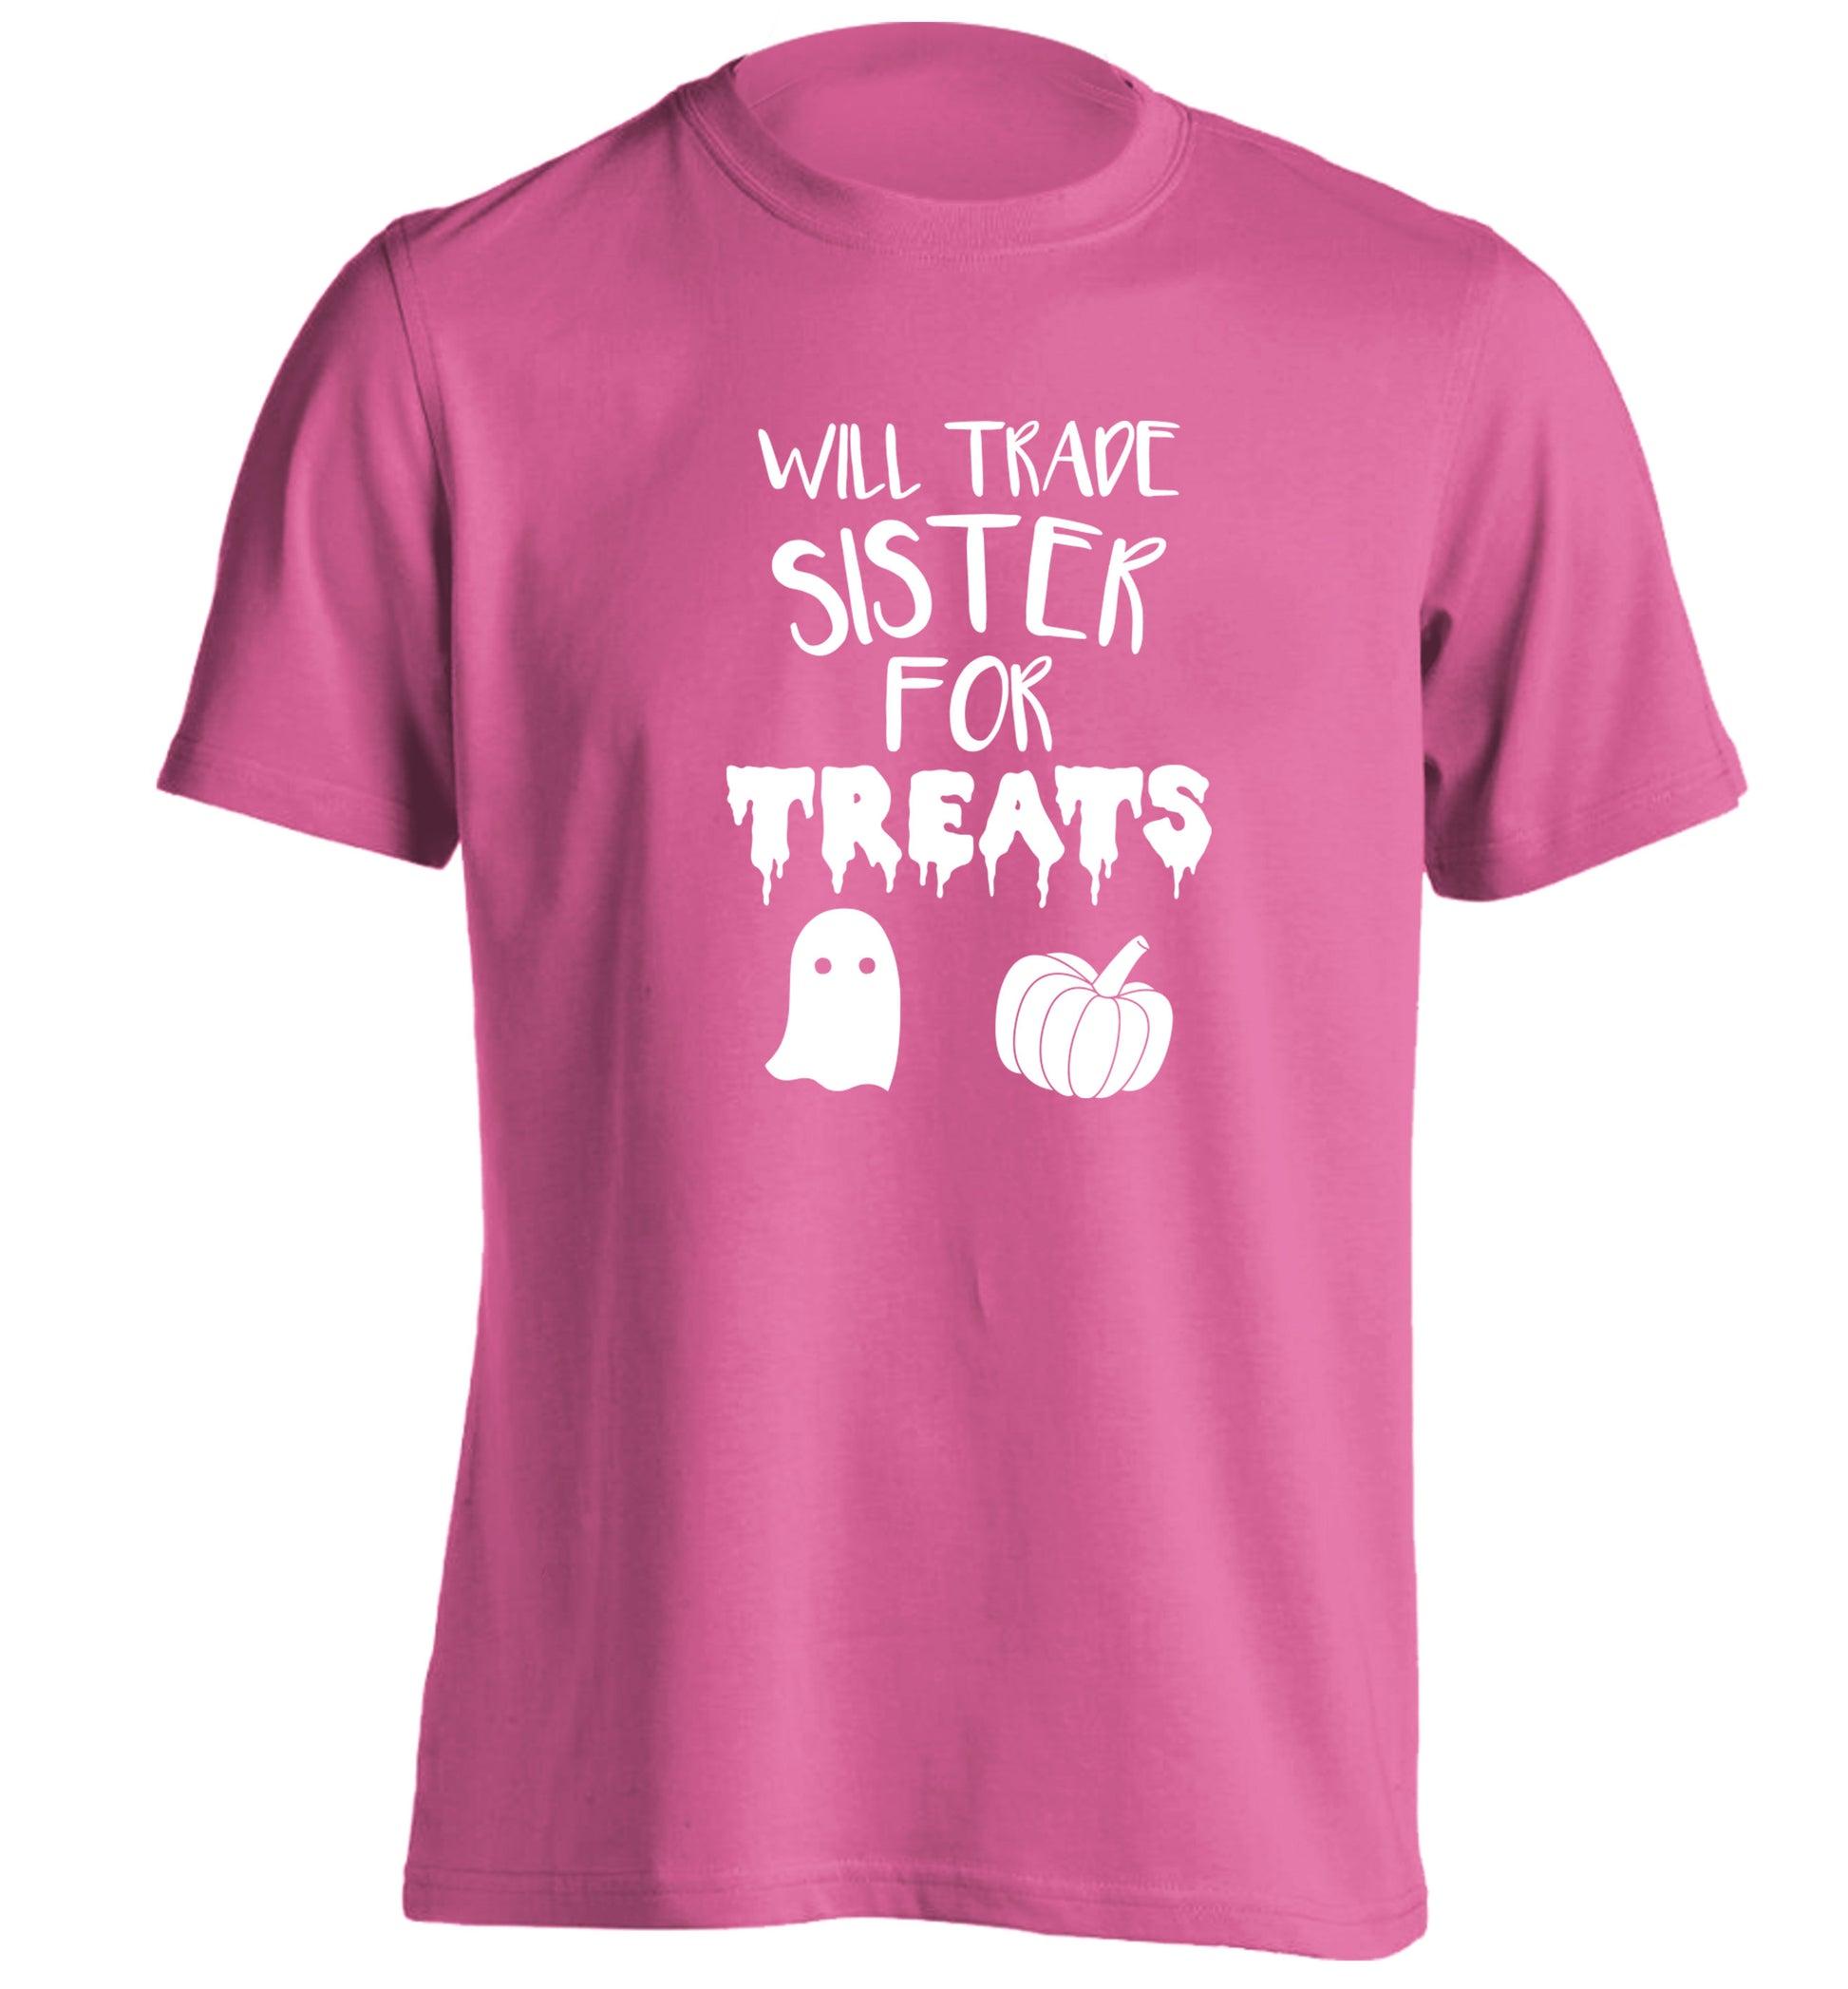 Will trade sister for treats adults unisex pink Tshirt 2XL